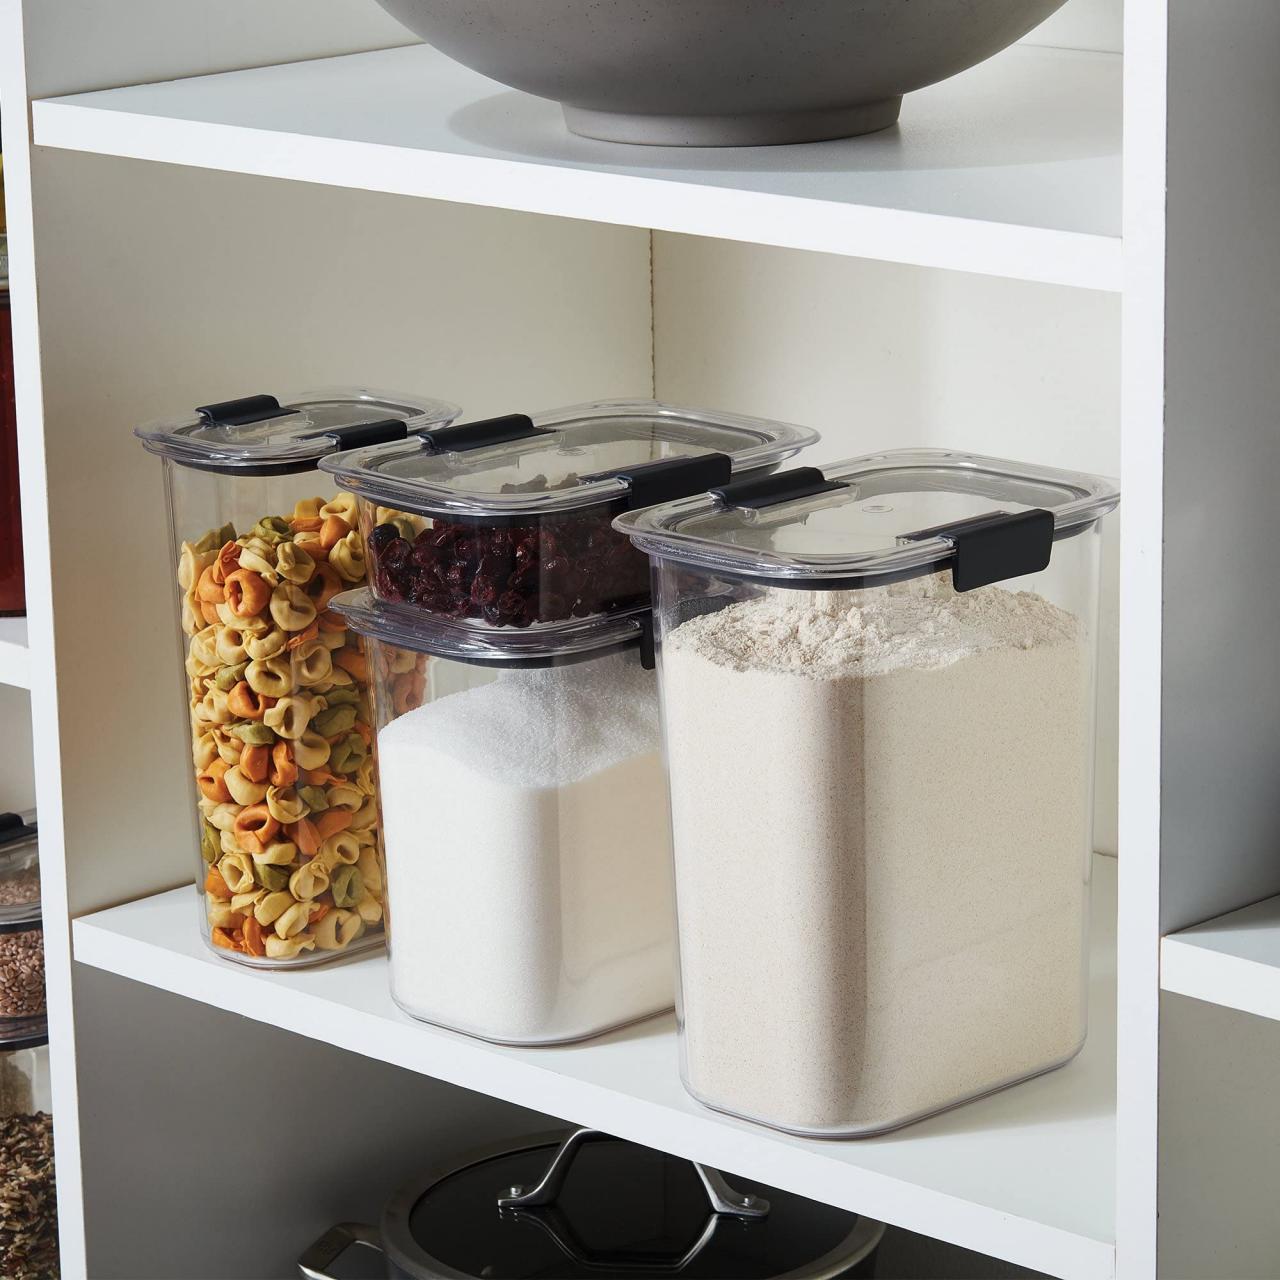 https://food.fnr.sndimg.com/content/dam/images/food/products/2021/1/27/rx_rubbermaid-brilliance-pantry-organization--food-storage-containers-with-airtight-lids.jpeg.rend.hgtvcom.1280.1280.suffix/1611773497423.jpeg